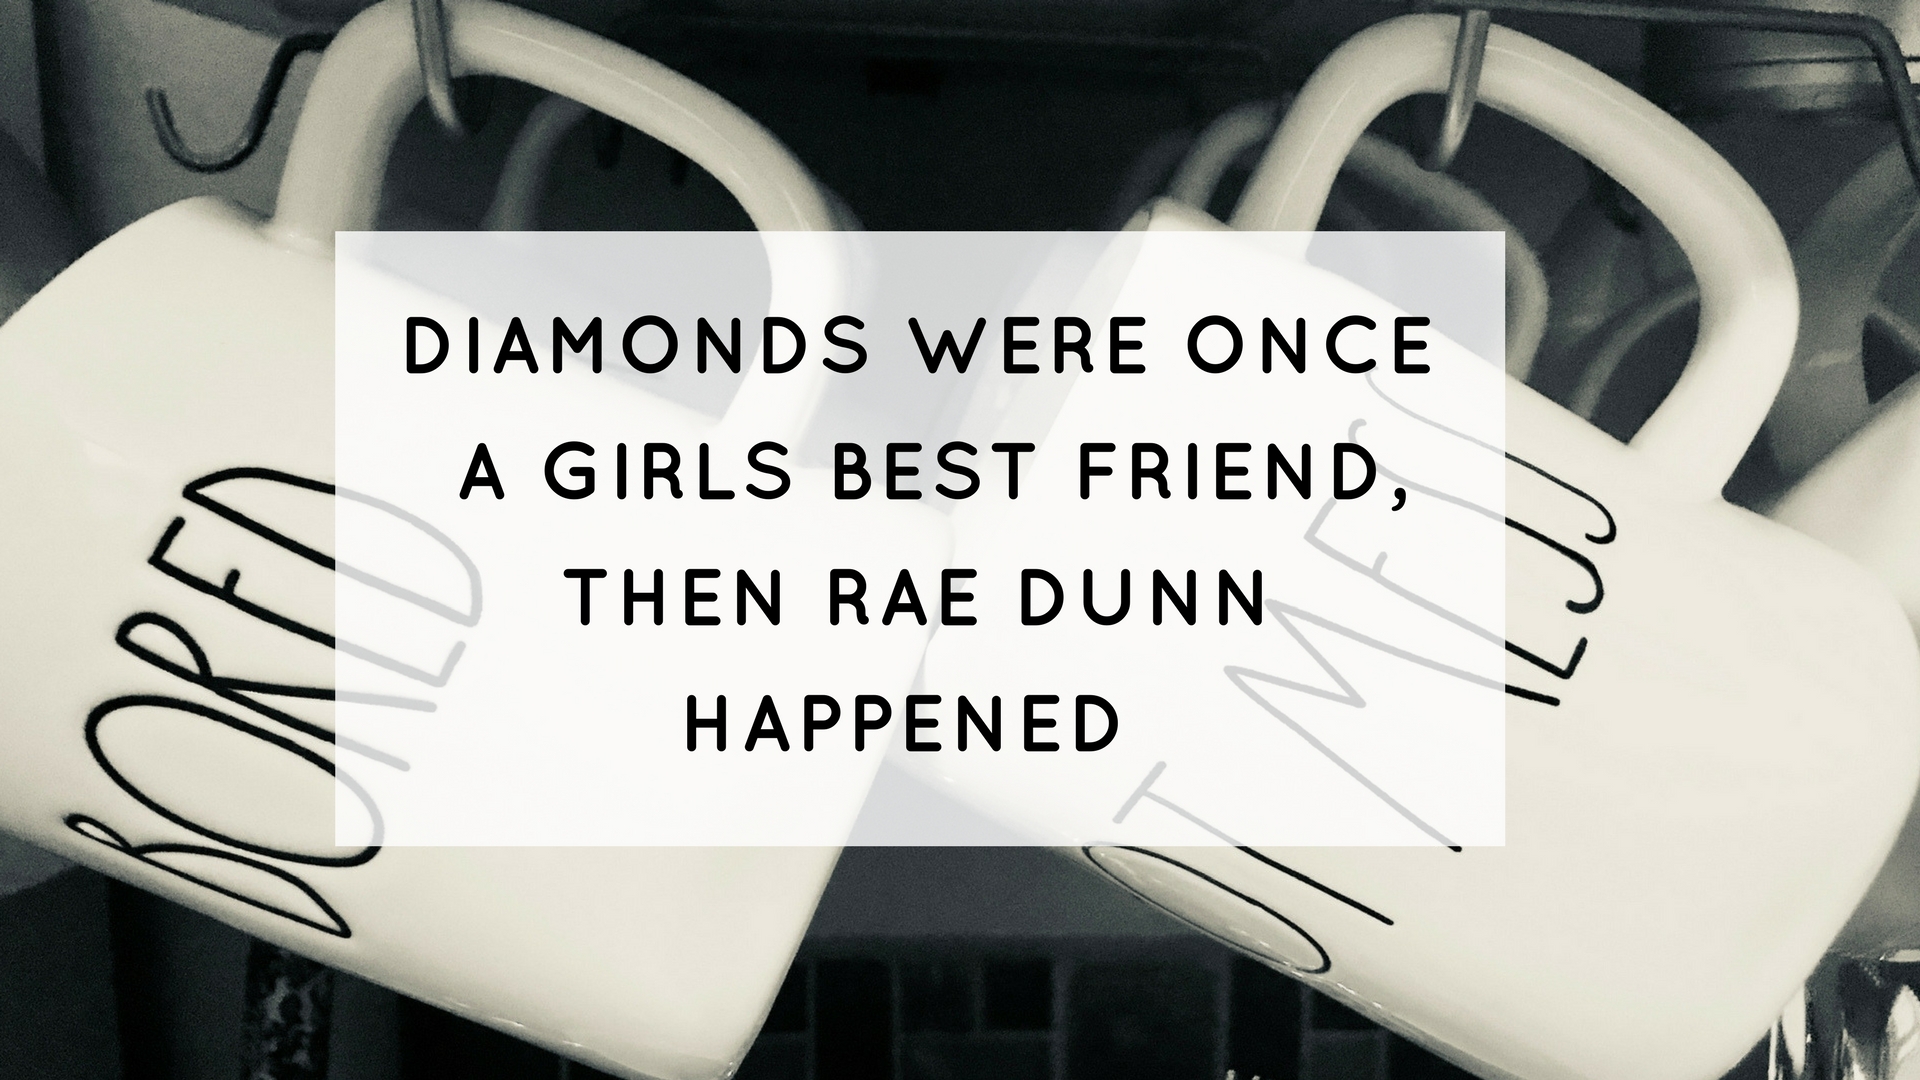 DIAMONDS USED TO BE A GIRLD BEST FRIEND, THEN RAE DUNN HAPPENED!